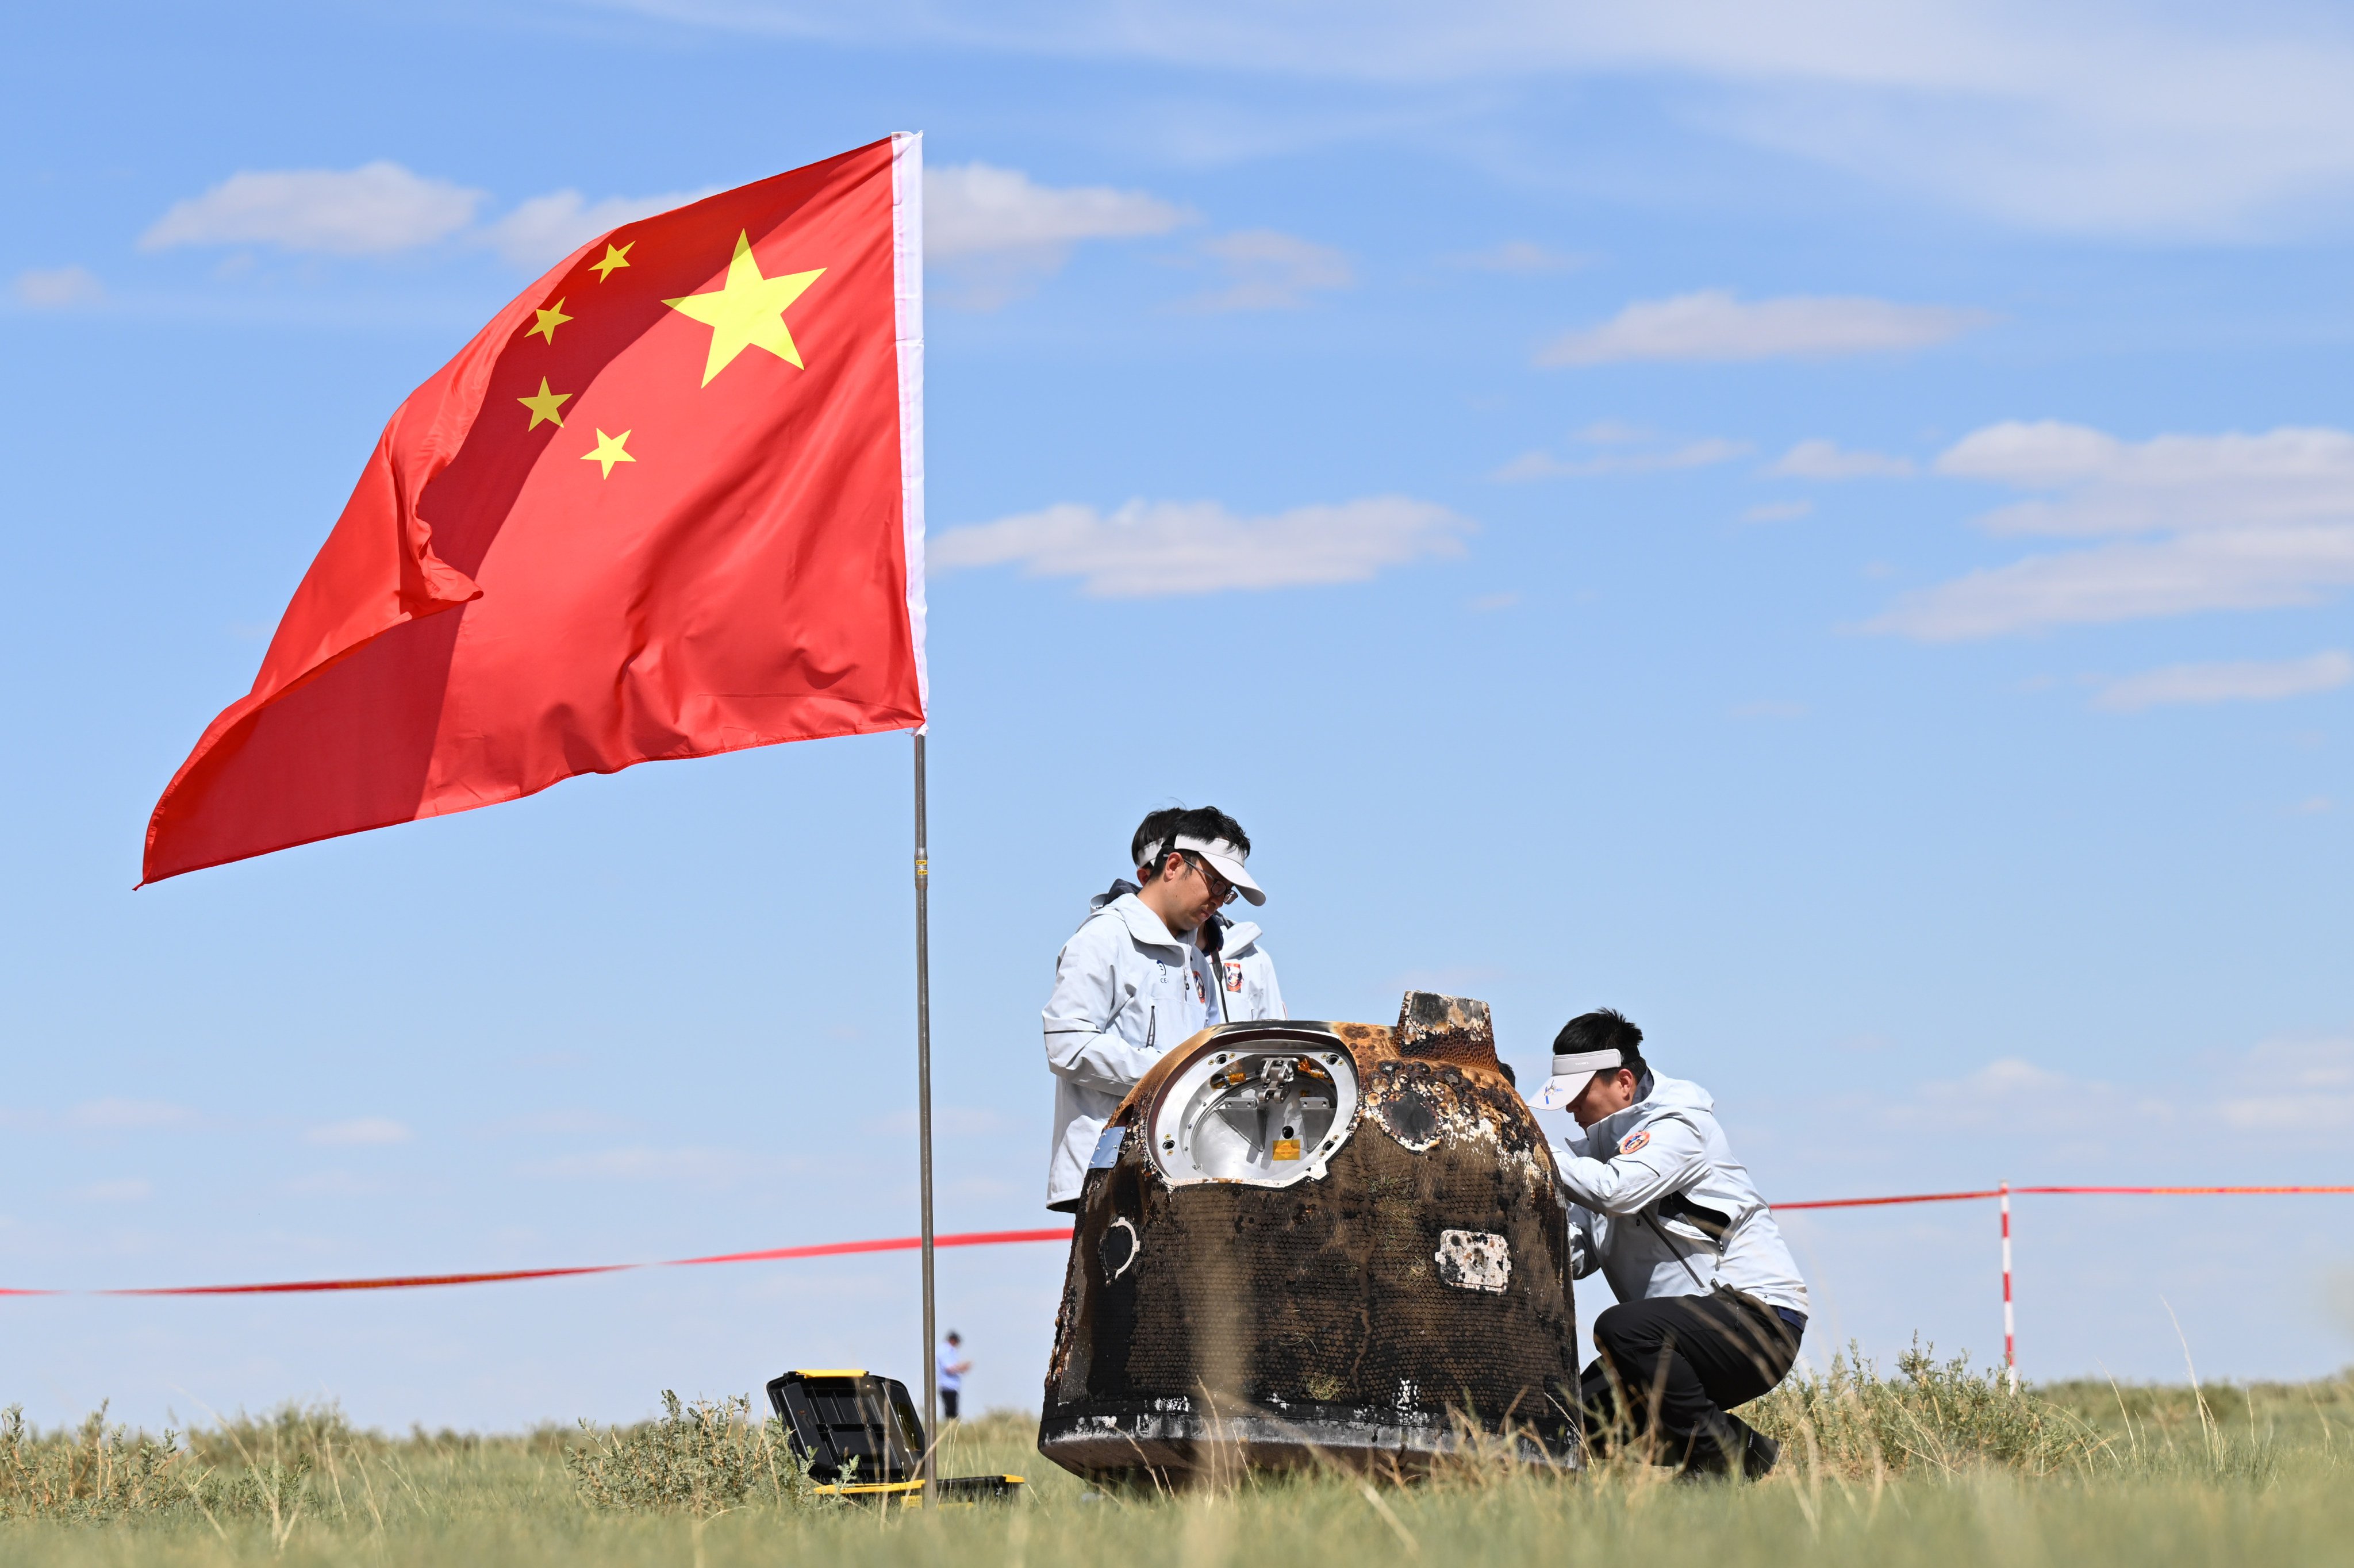 A re-entry capsule containing samples from the far side of the moon touched down in Inner Mongolia on Tuesday. Photo: Xinhua